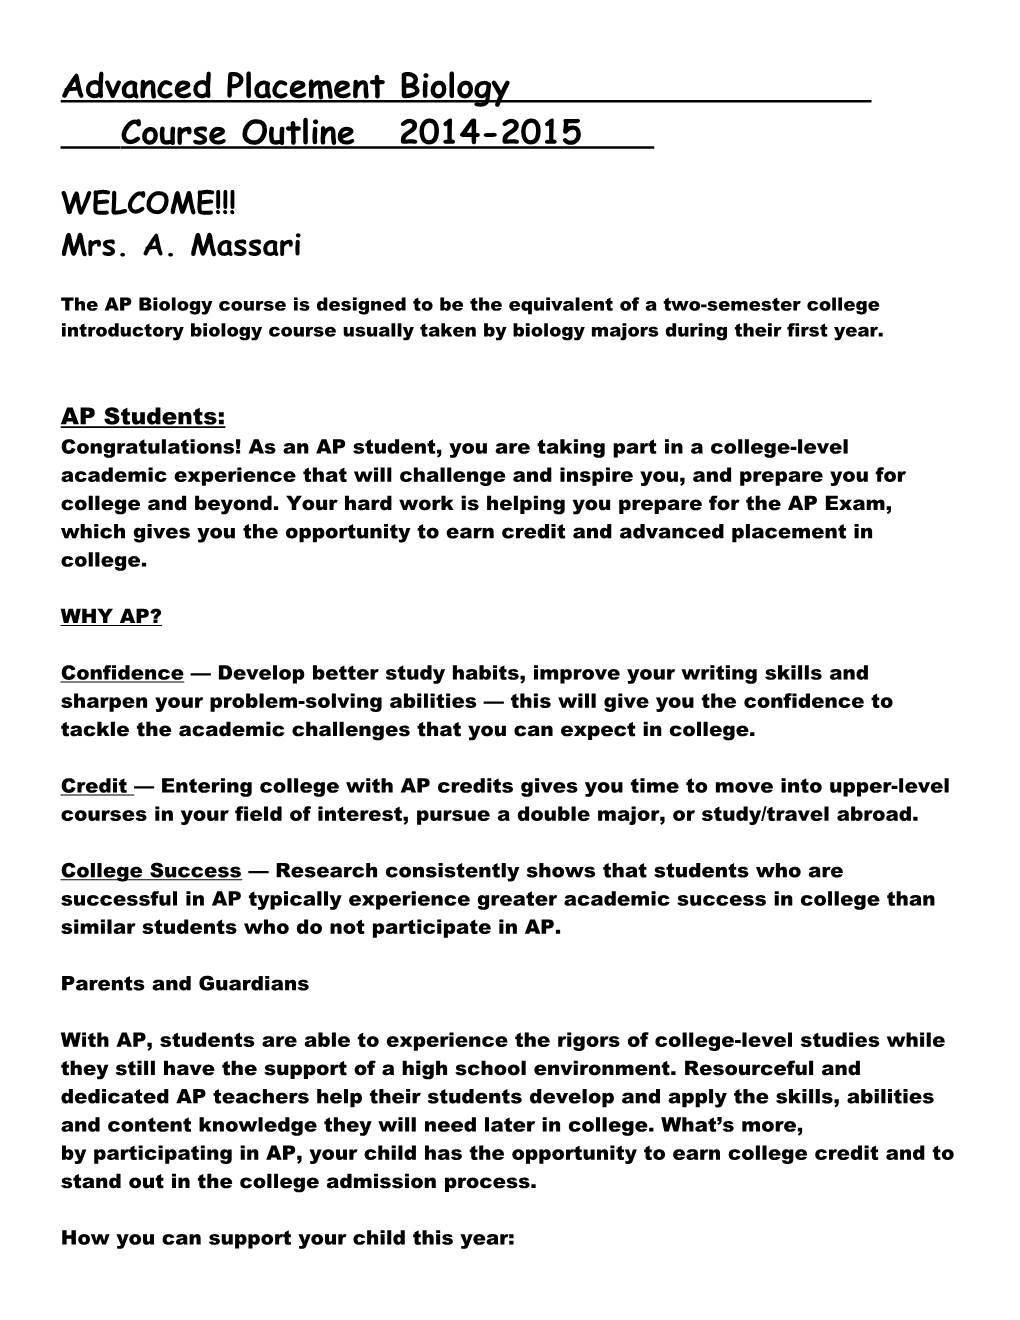 Advanced Placement Biology Course Outline 2014-2015